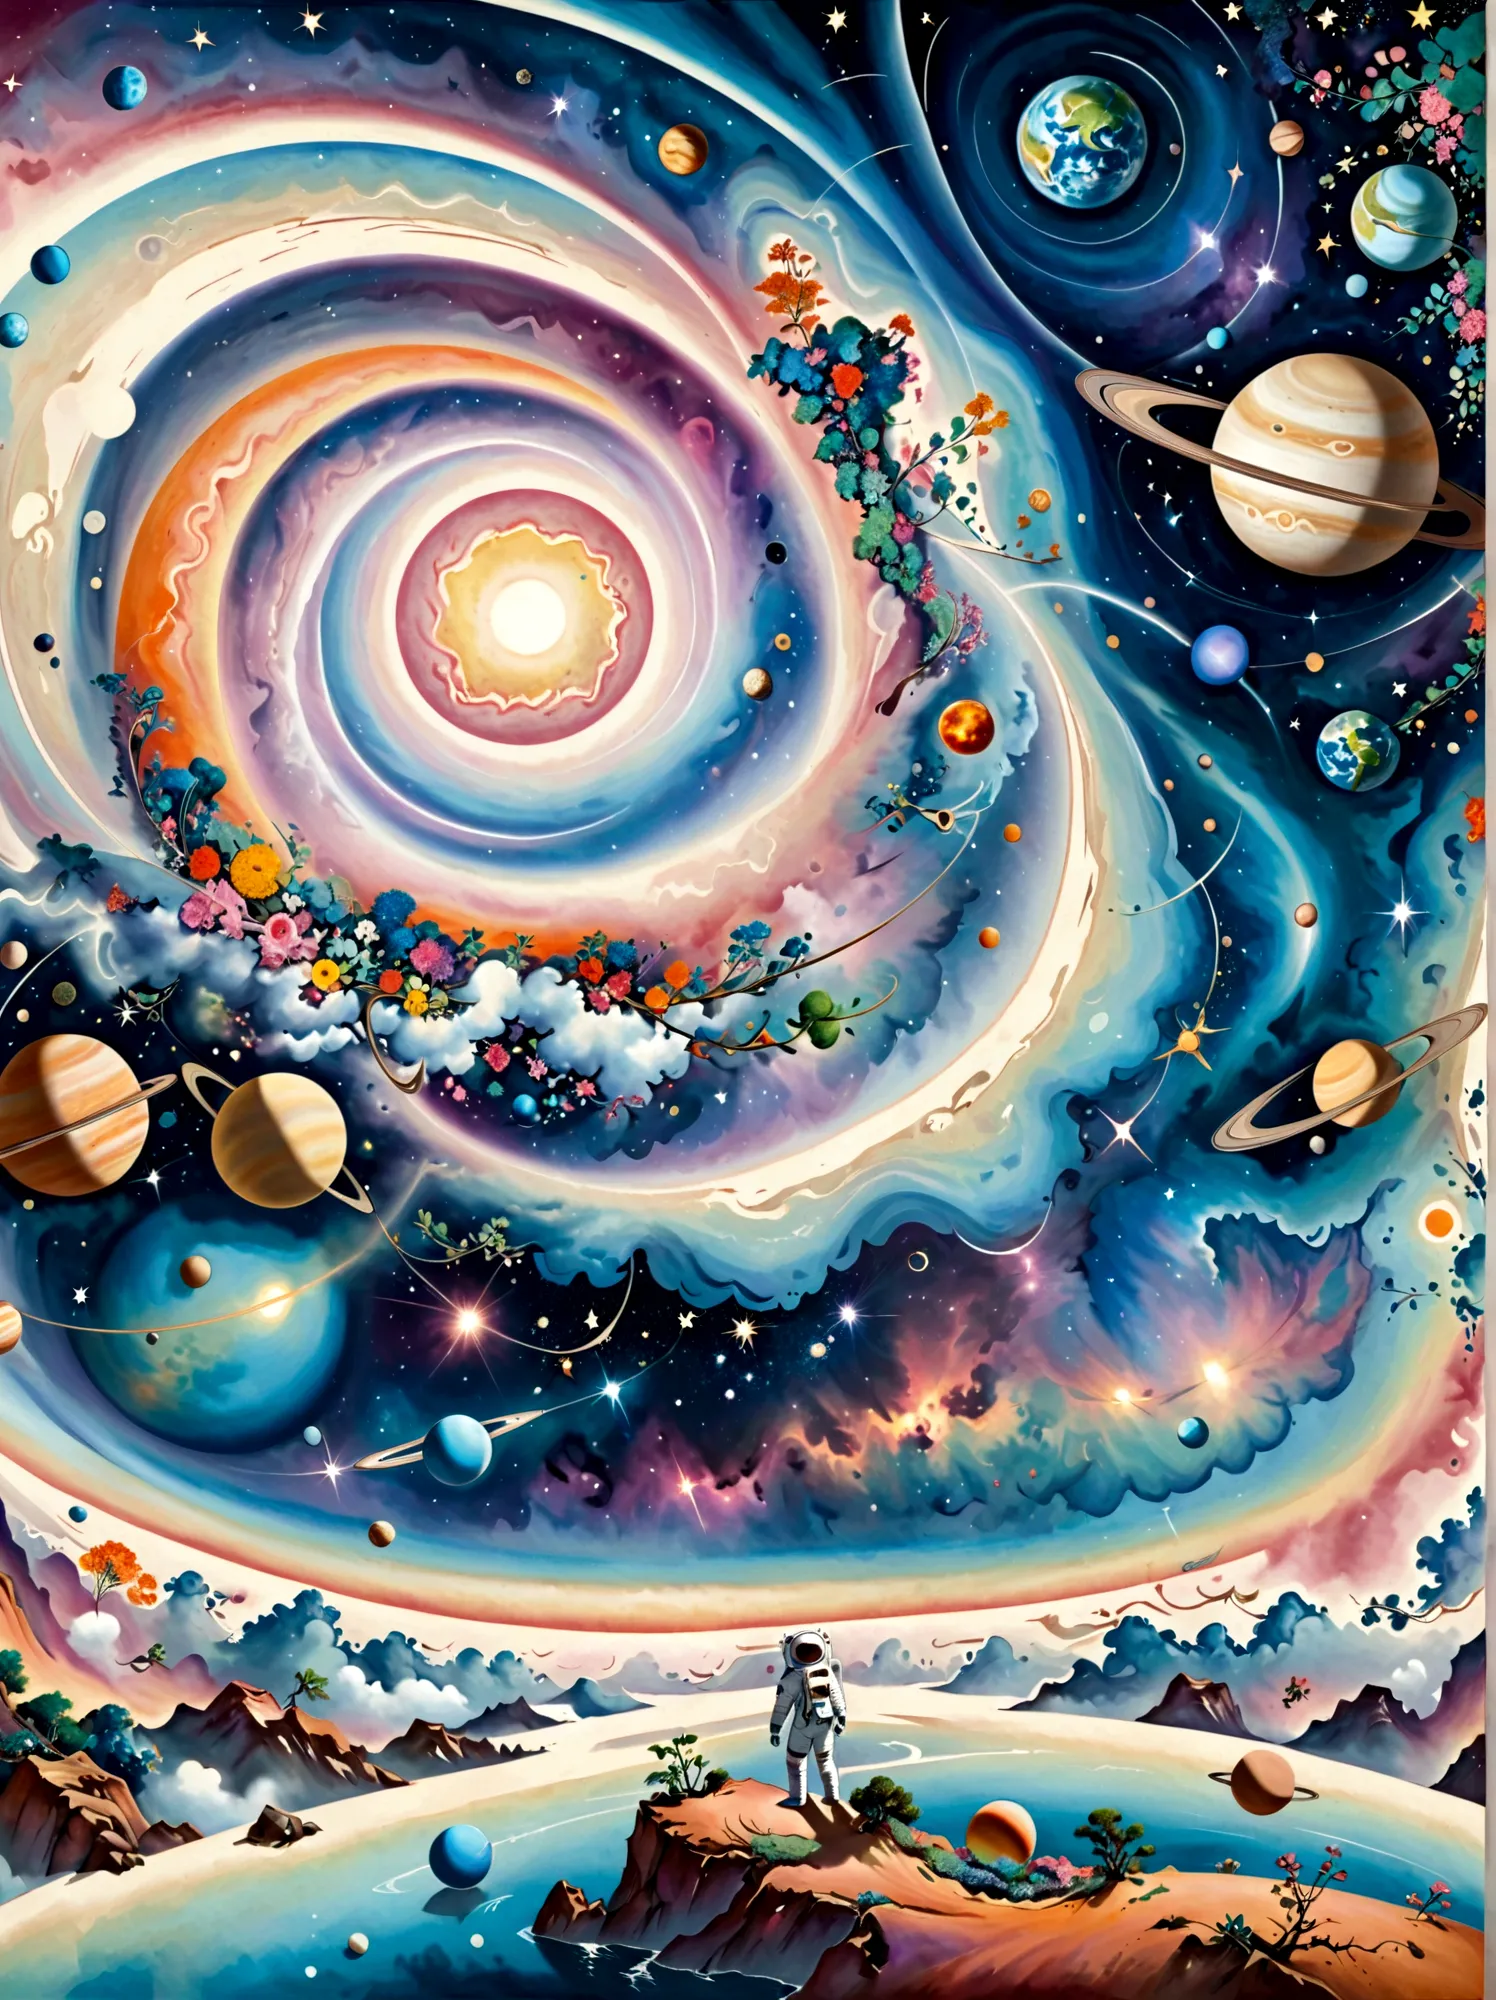 Imagine a surreal perspective of space exploration. There's an astronaut on an abstract shaped planet with swirling colors of co...